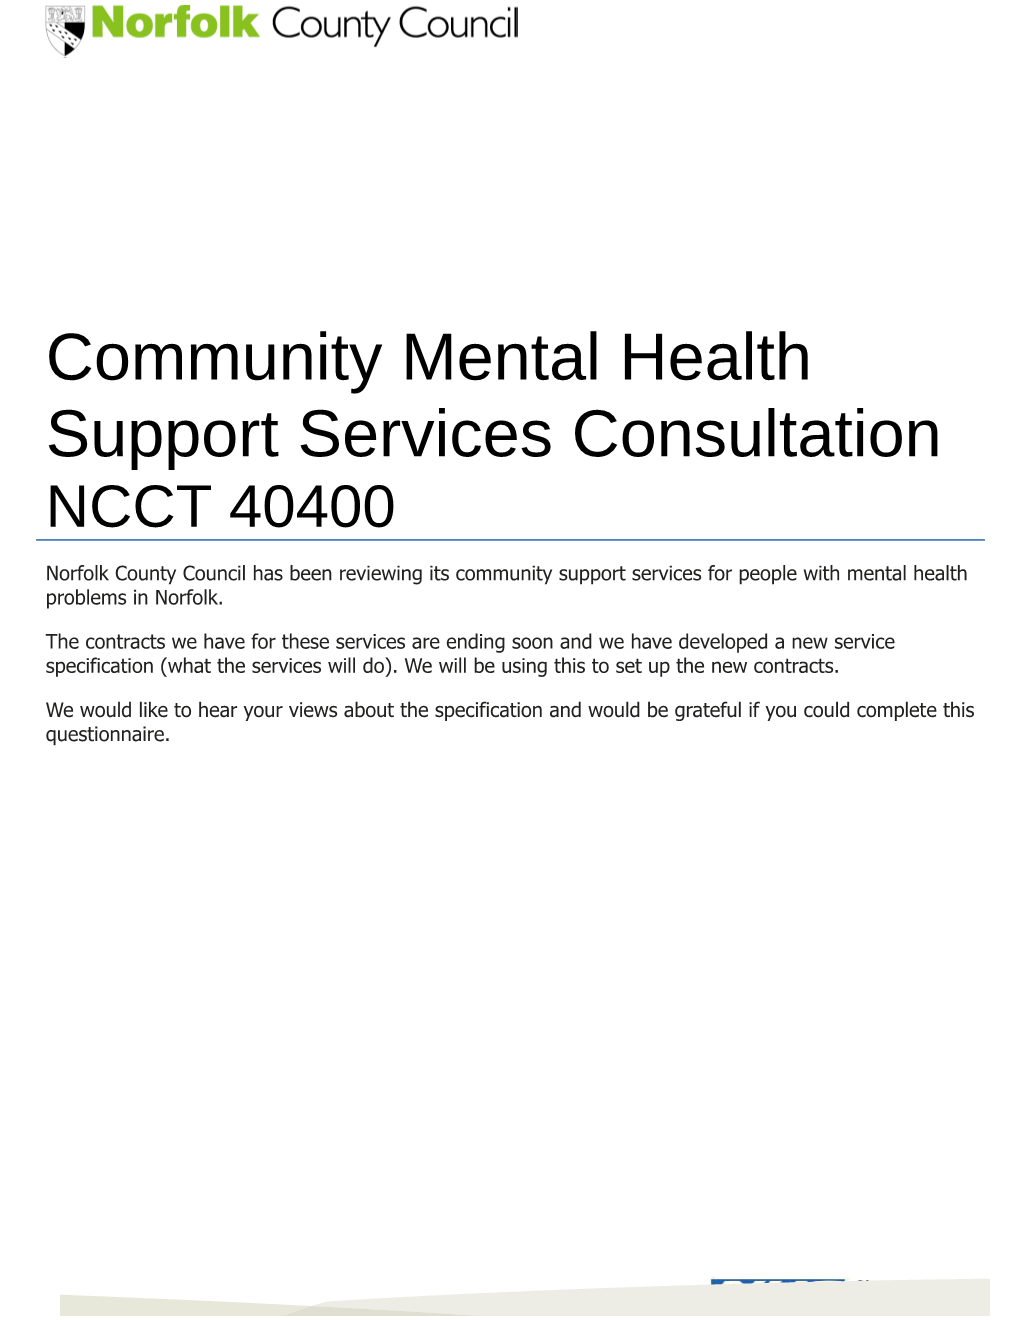 Intensive Floating Support Services, Mental Health and HIV/Aids Consultation